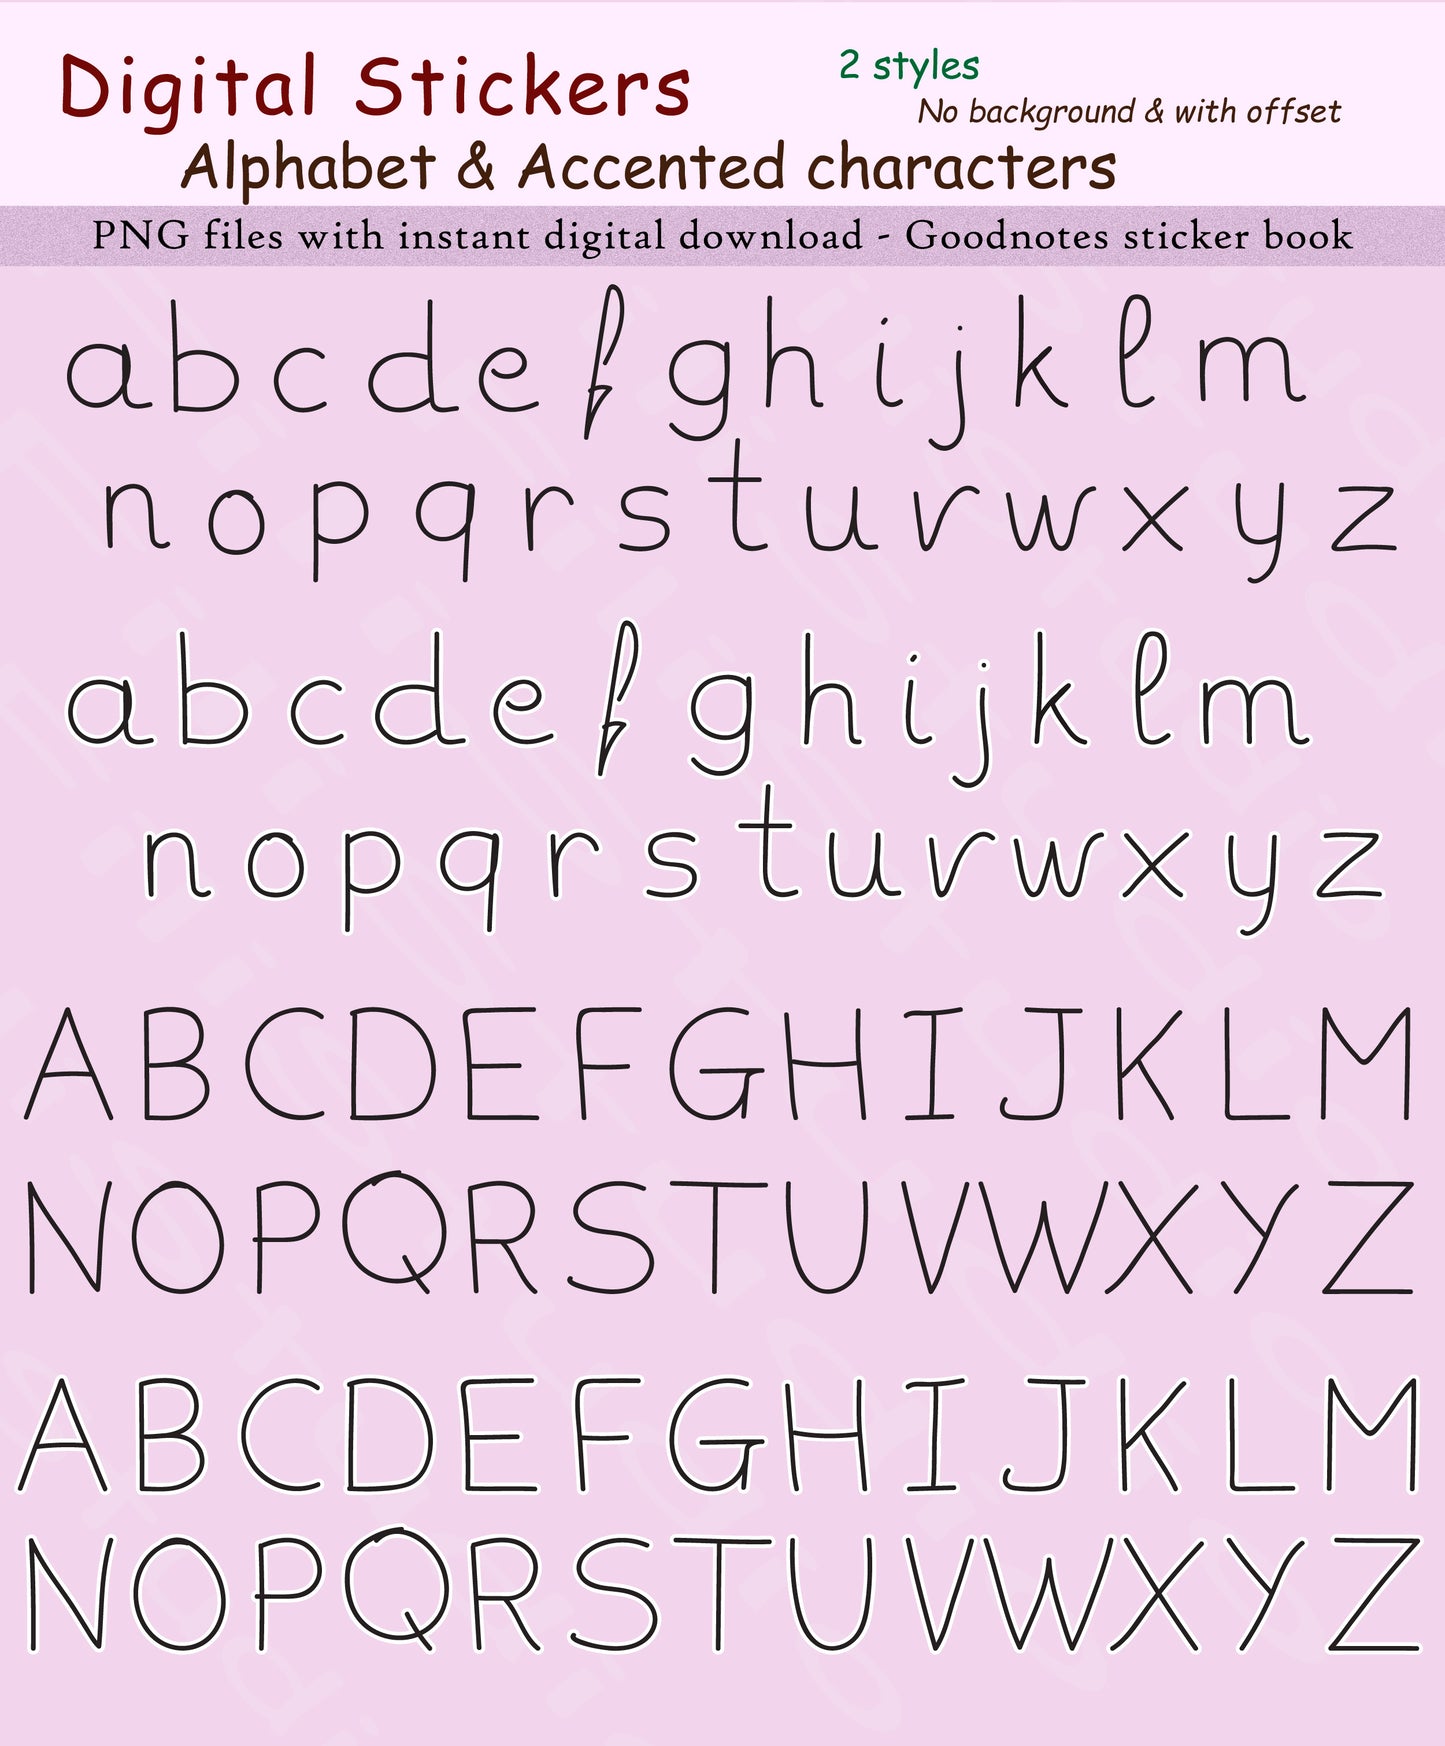 Hand-drawn Alphabet & Accented Characters - Digital sticker